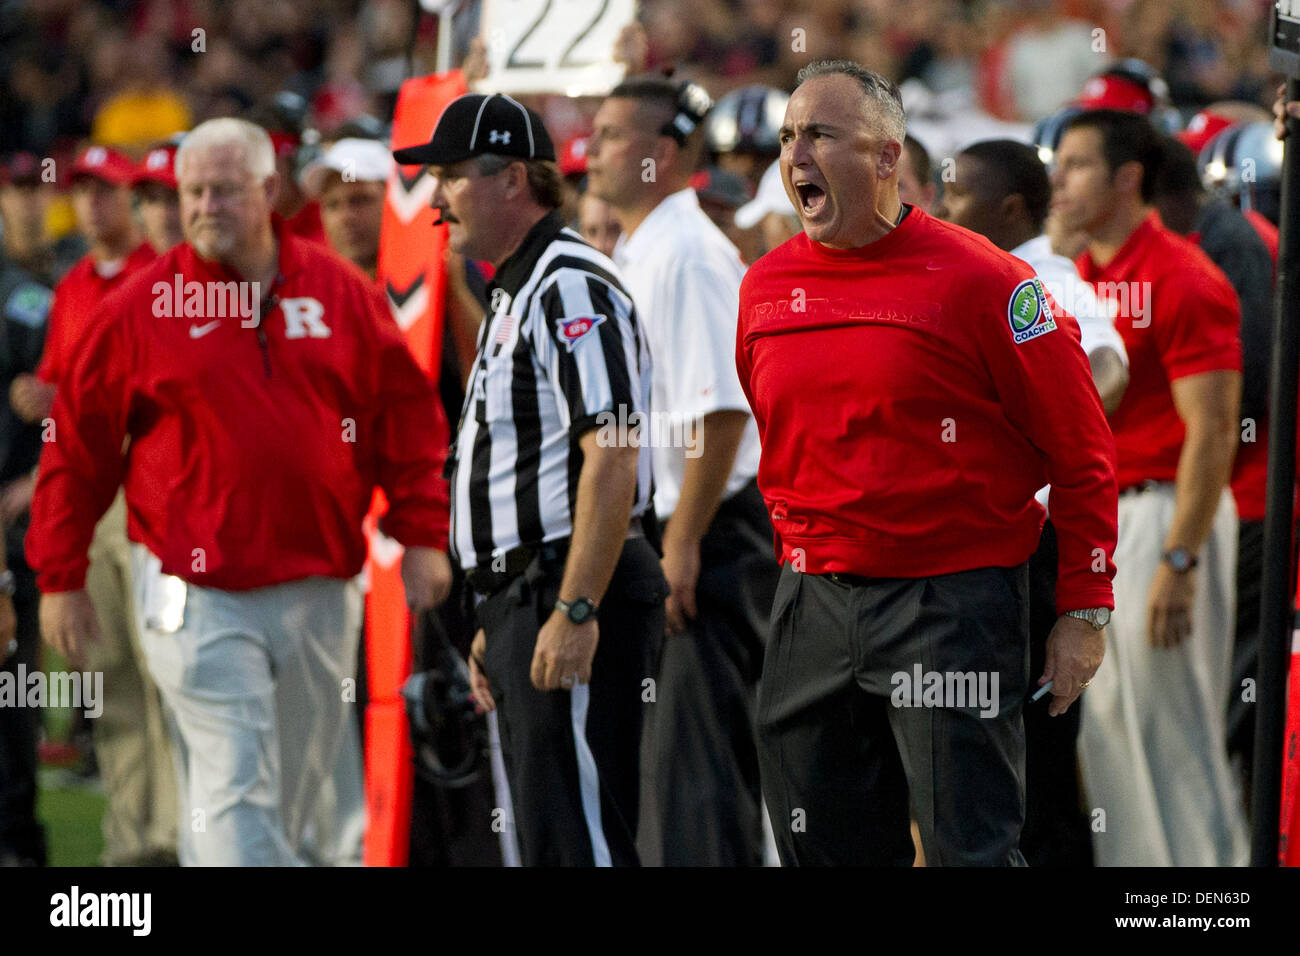 Piscataway, New Jersey, USA. 21st Sep, 2013. September 21, 2013: Rutgers Scarlet Knights head coach Kyle Flood is fired up during the game between Arkansas Razorbacks and Rutgers Scarlet Knights at Highpoint Solutions Stadium in Piscataway, NJ. Rutgers Scarlet Knights defeated The Arkansas Razorbacks 28-24. Credit:  csm/Alamy Live News Stock Photo